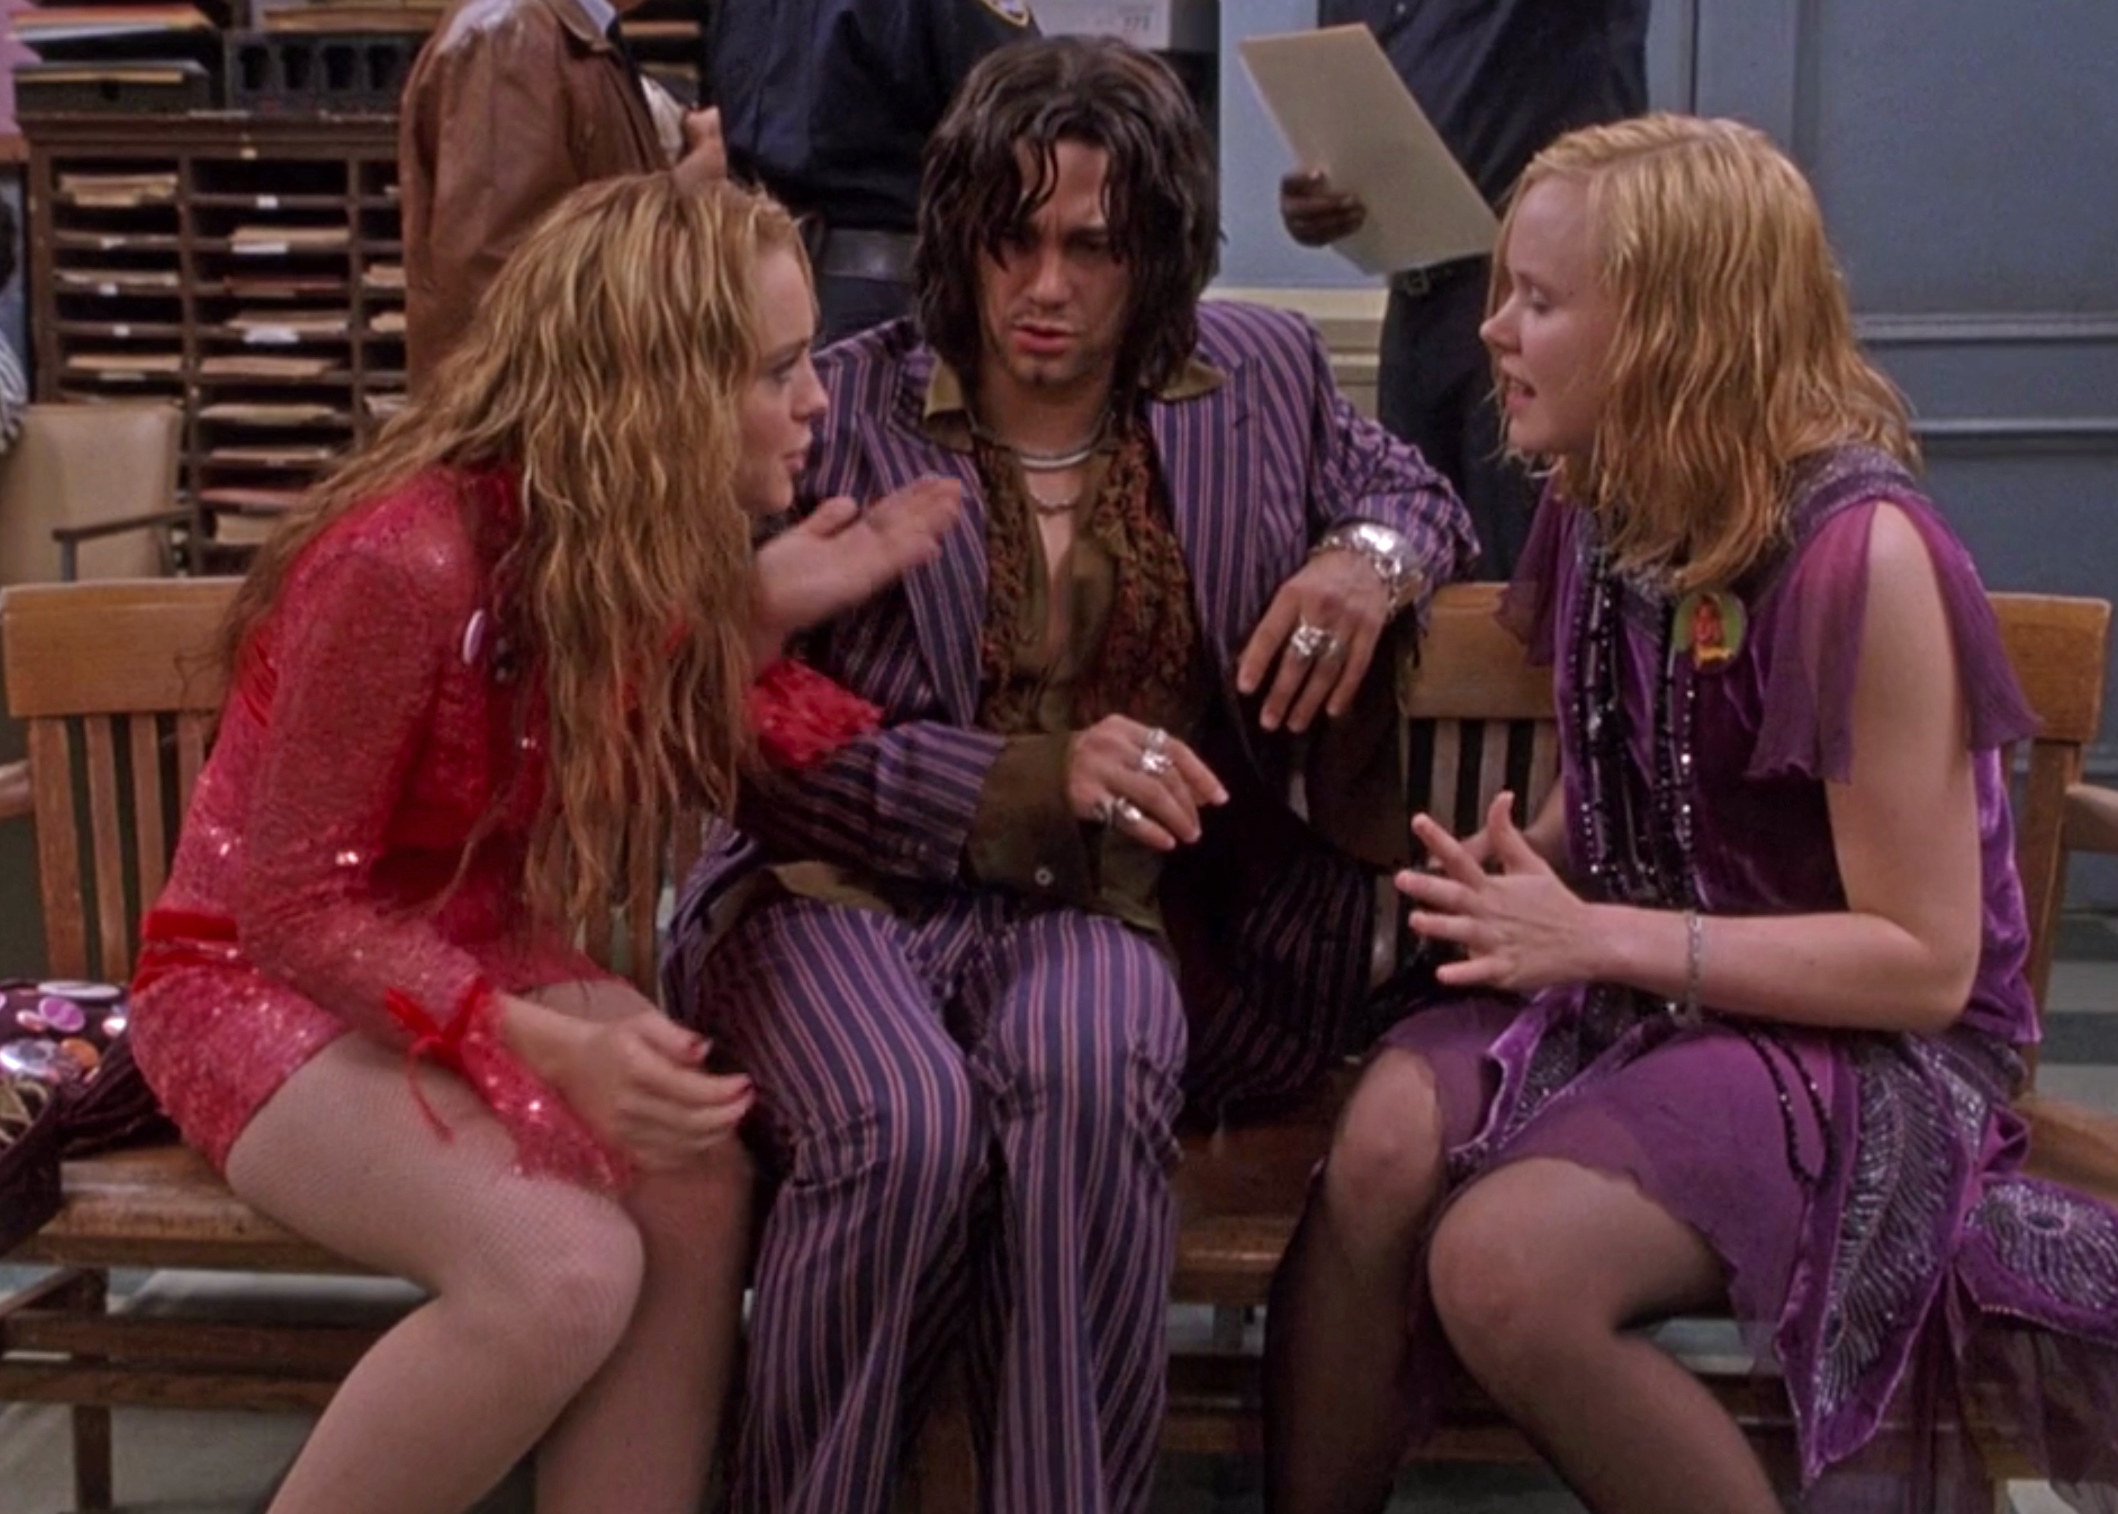 Lindsay Lohan and Alison Pill argue as they sit on as Lola and Ella, while Adam Garcia sits in between them as Stu